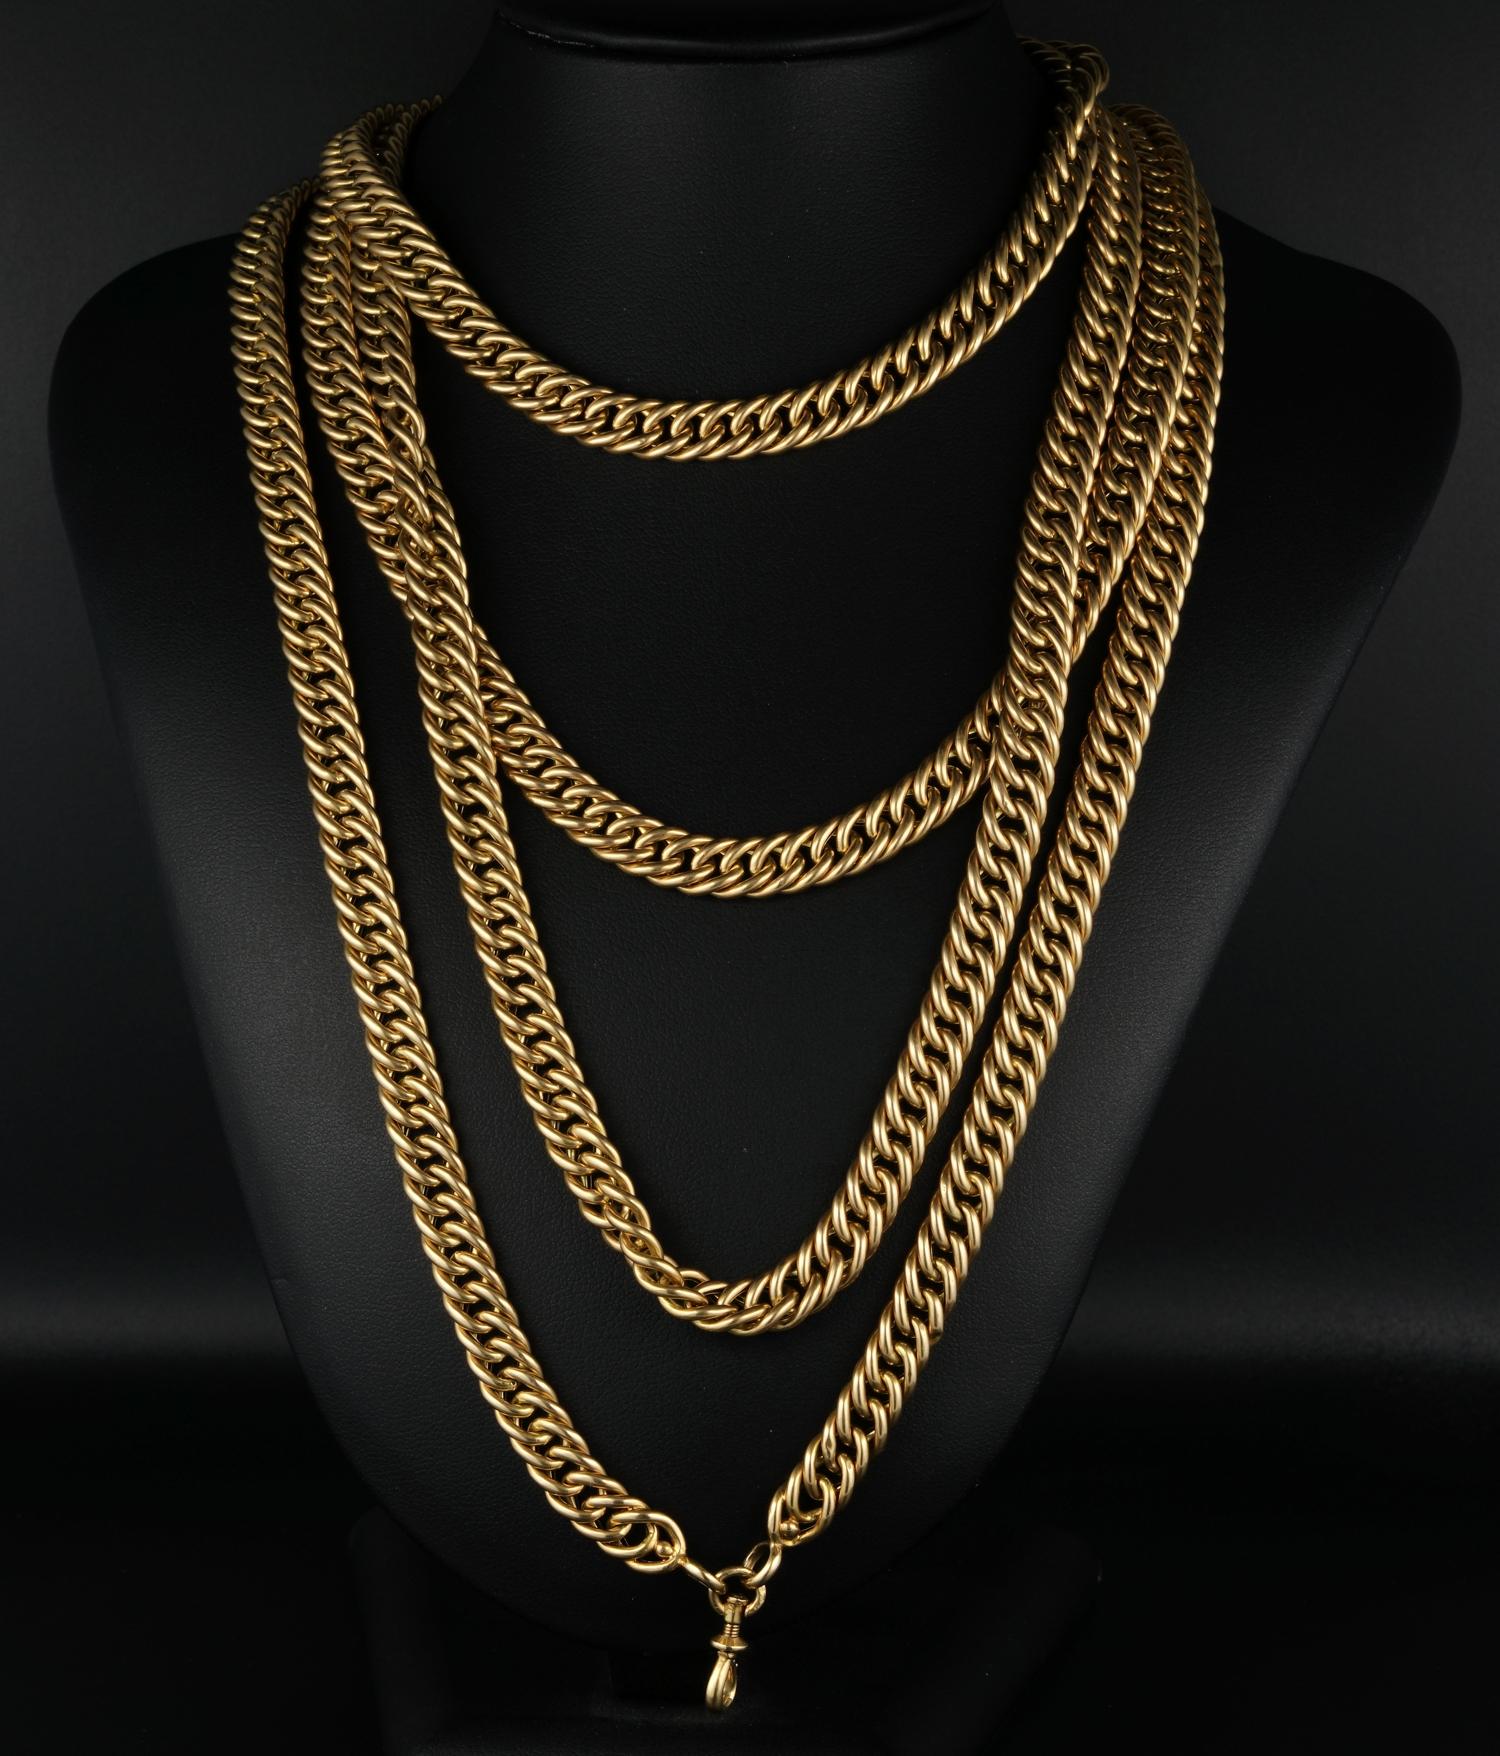 Victorian Gold Glam

This very rare to come across, superb in length, as hardly seen, is all made of solid 18 KT gold
Silky, smooth to the touch, articulated curb links, amazing gold weight of 68.9 grams – 166 cm long!
Charming when worn on, turned